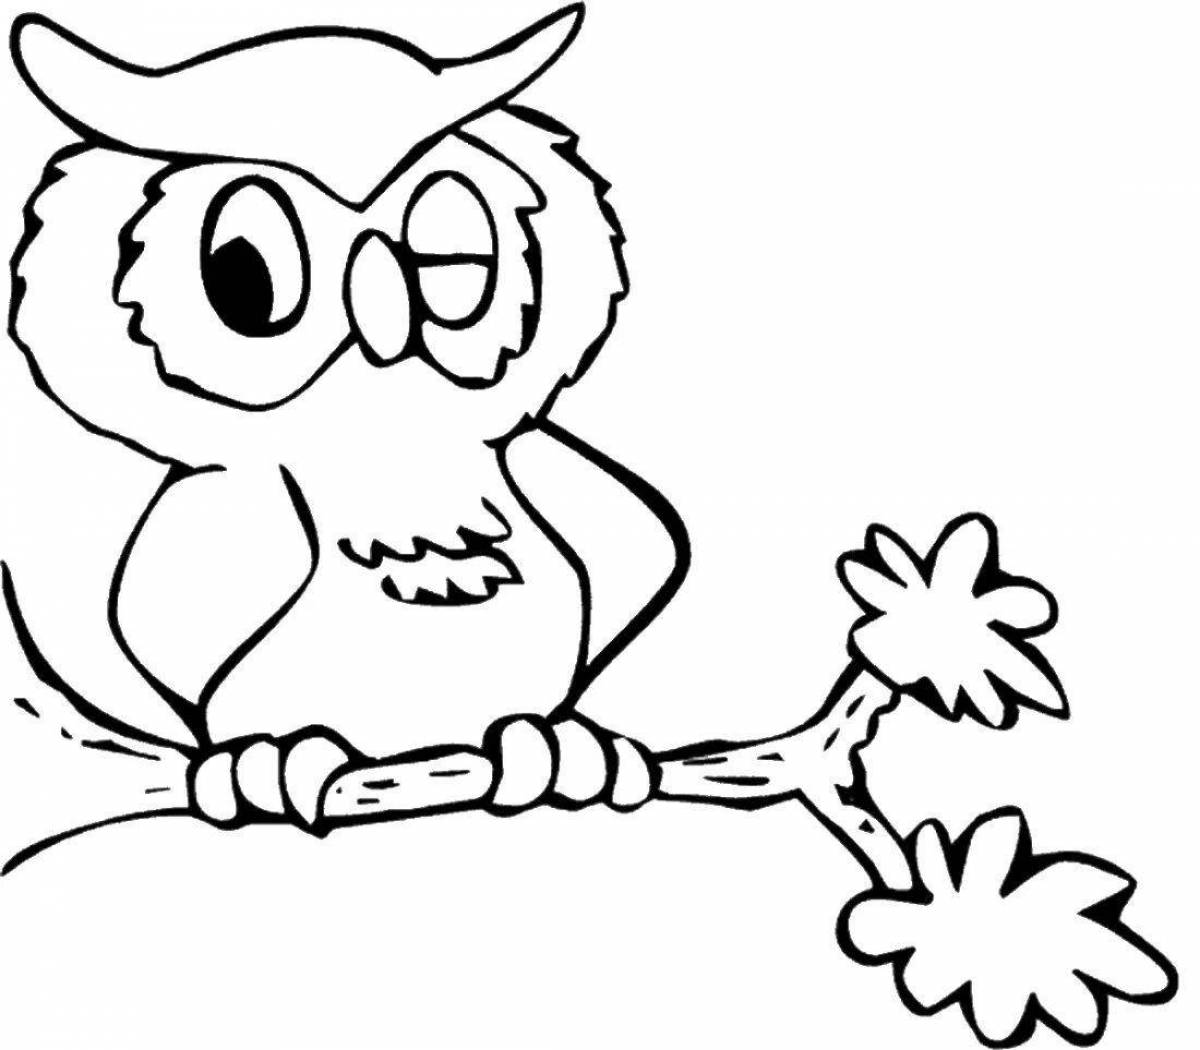 Exquisite wise owl coloring book for kids